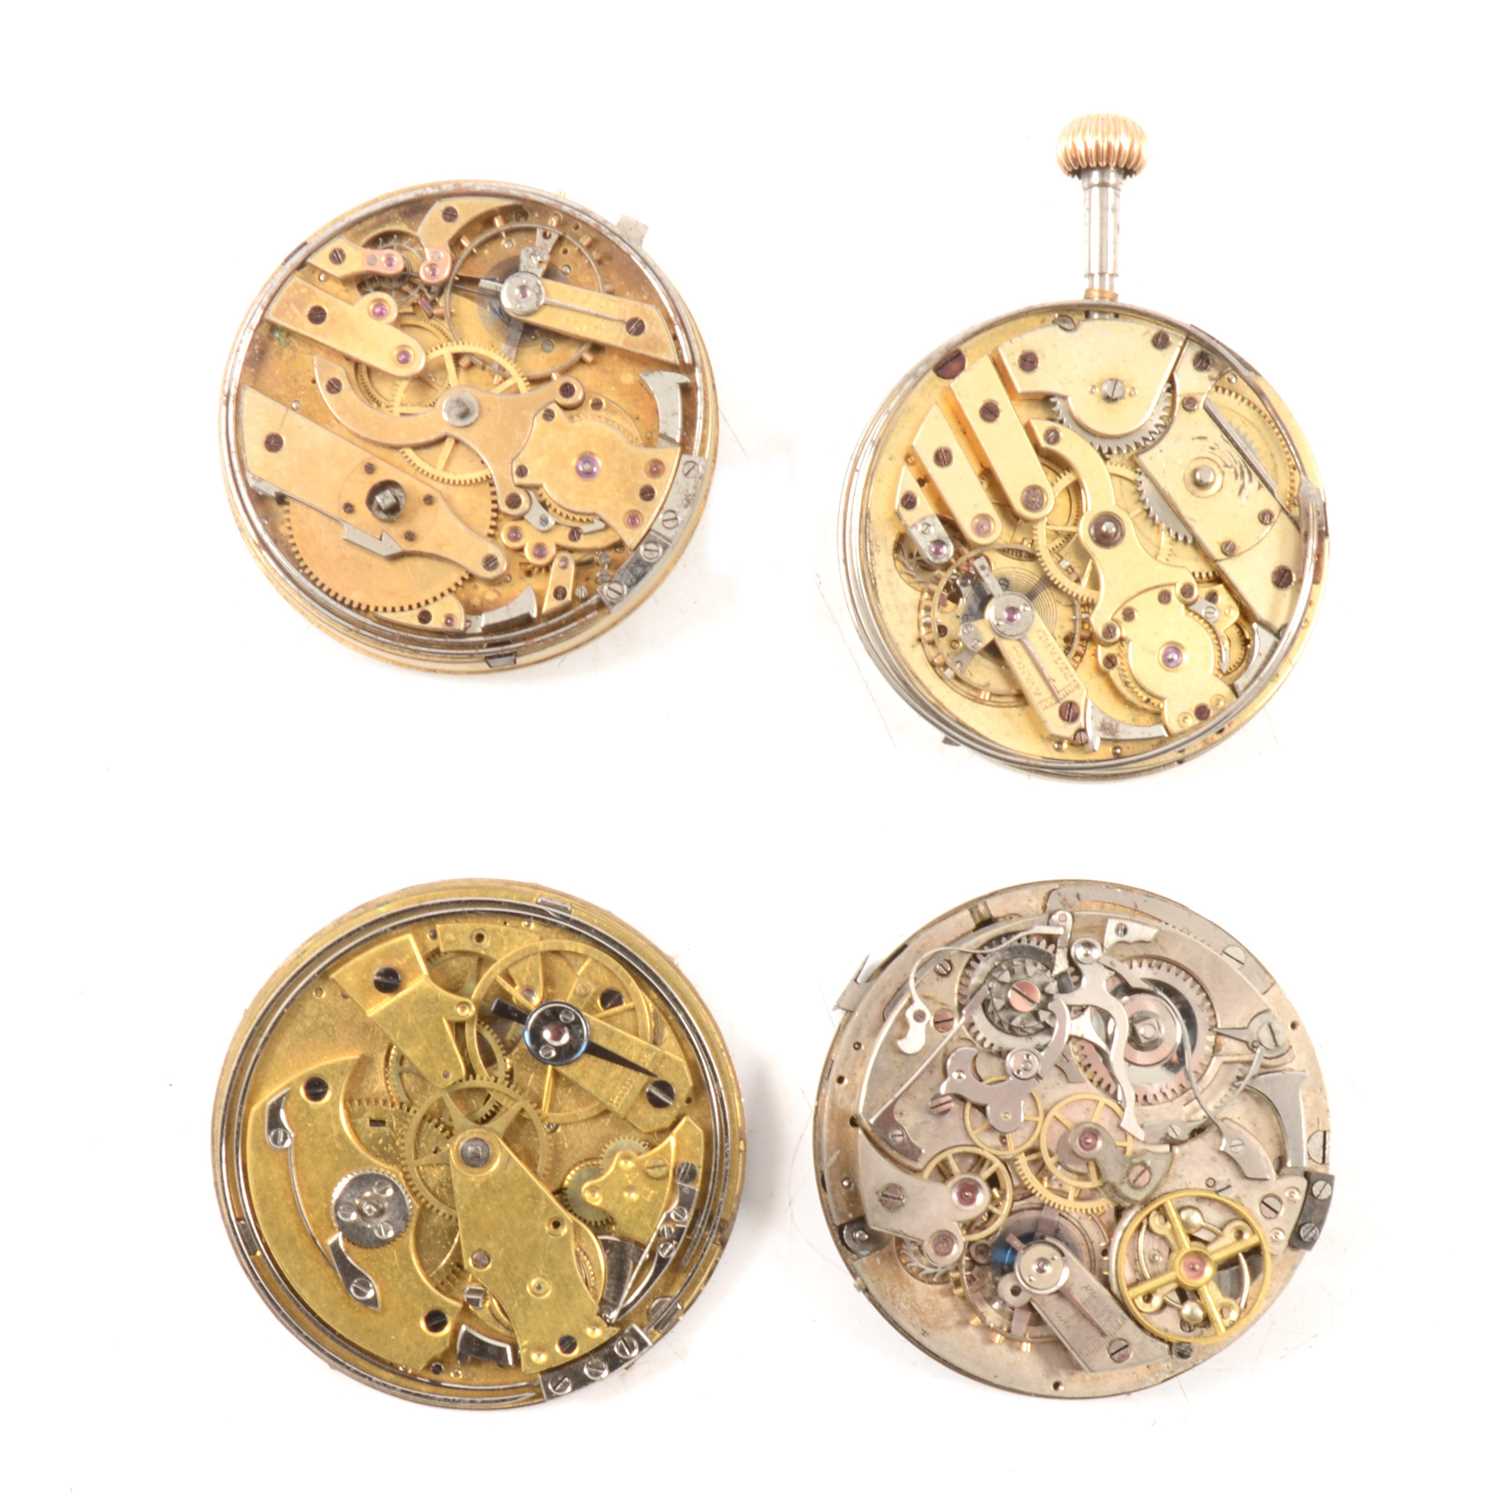 Lot 122 - Four repeater pocket watch movements, all as found